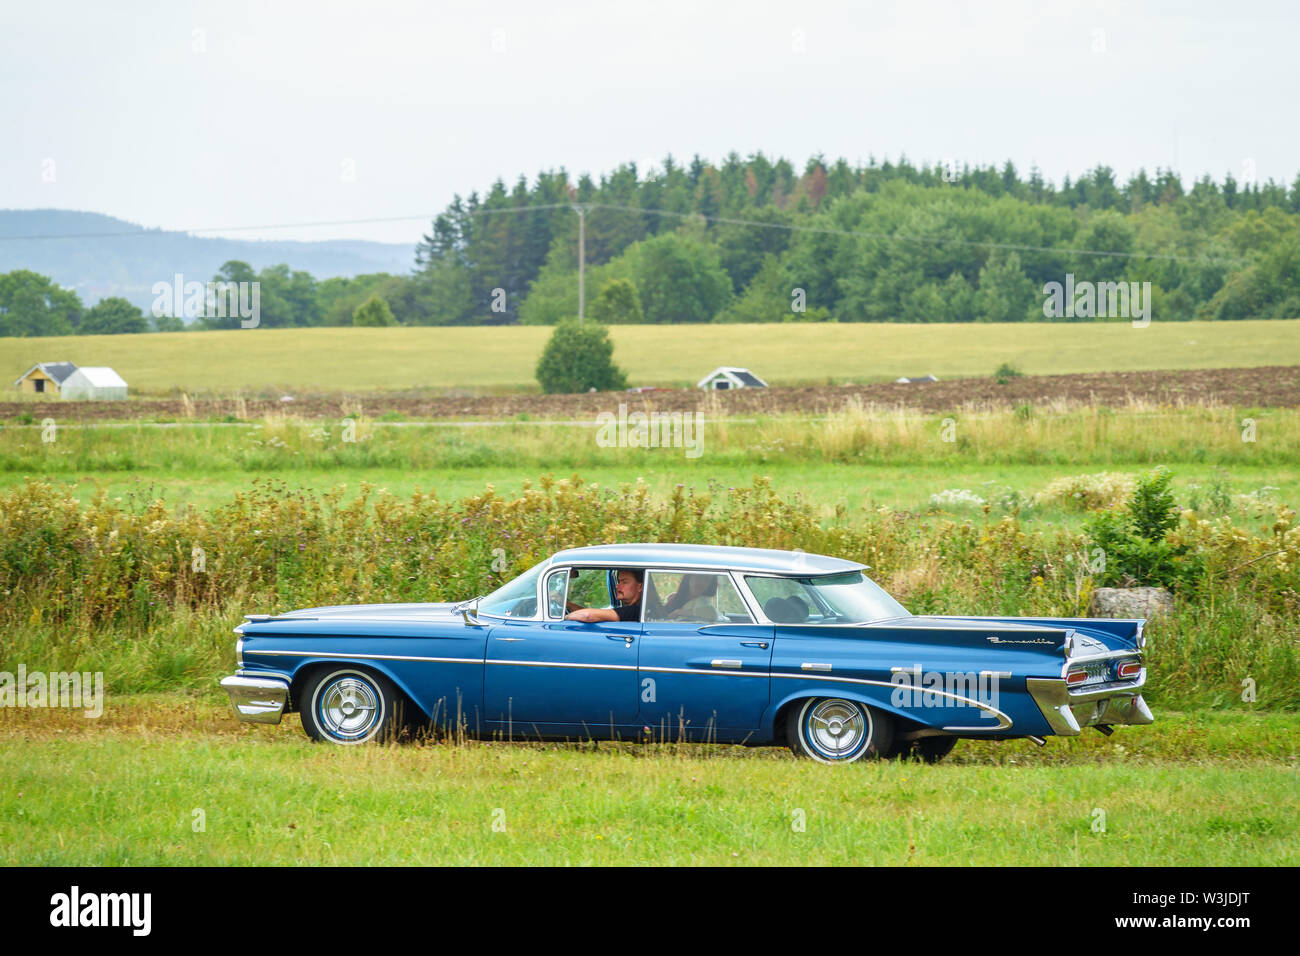 Classic old Pontiac Bonneville car in the countryside Stock Photo